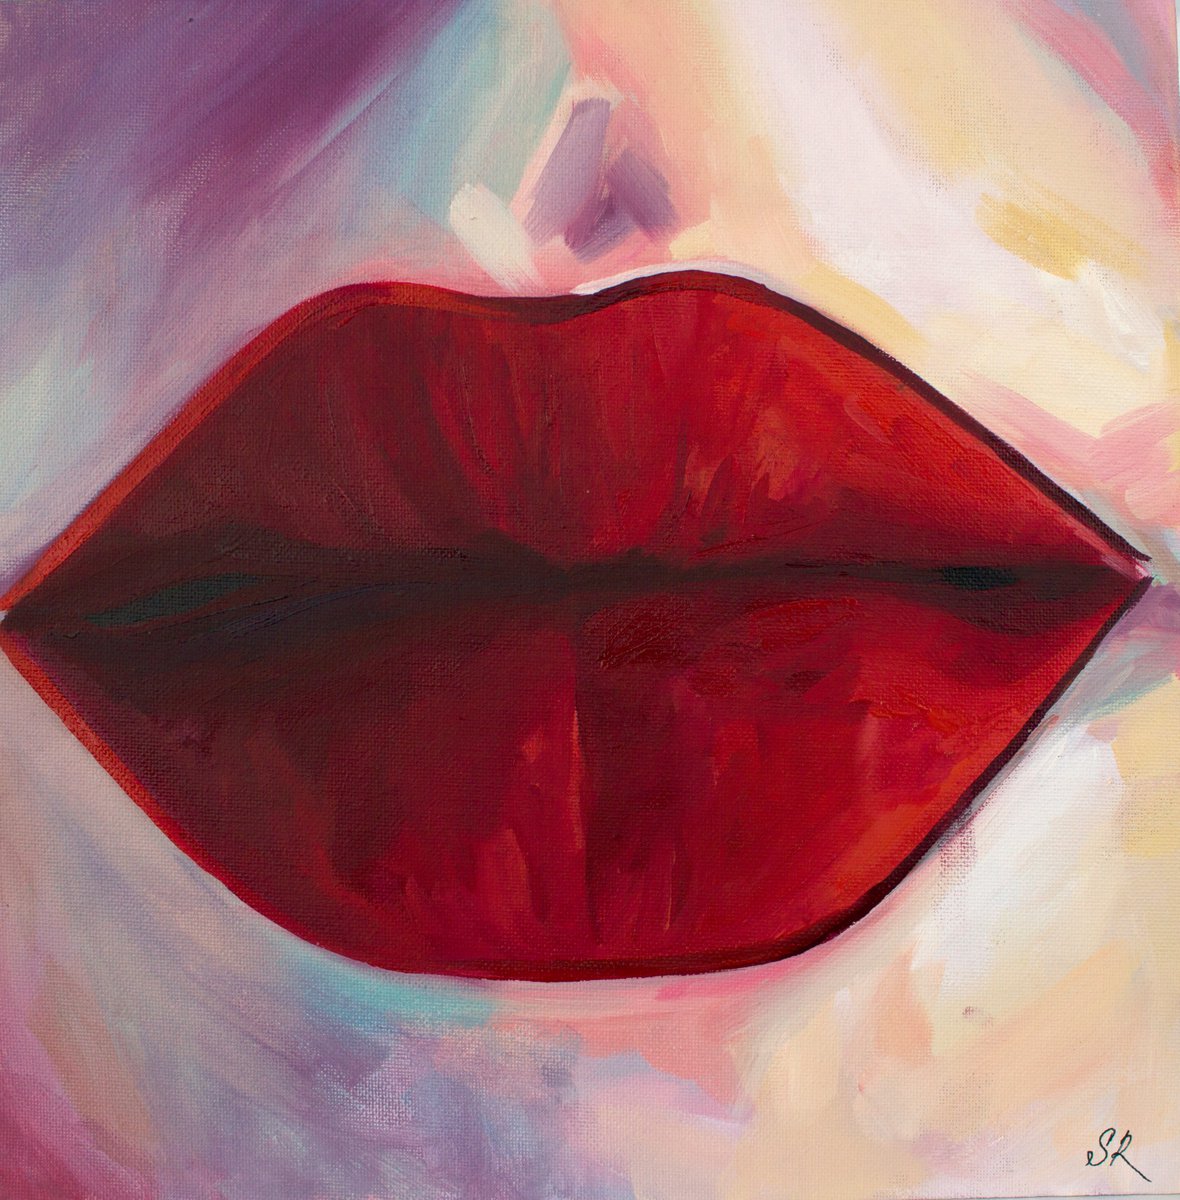 CHANEL LIPS - oil painting, original gift, girl, red, red trunks, ass, office decor, home... by Sasha Robinson